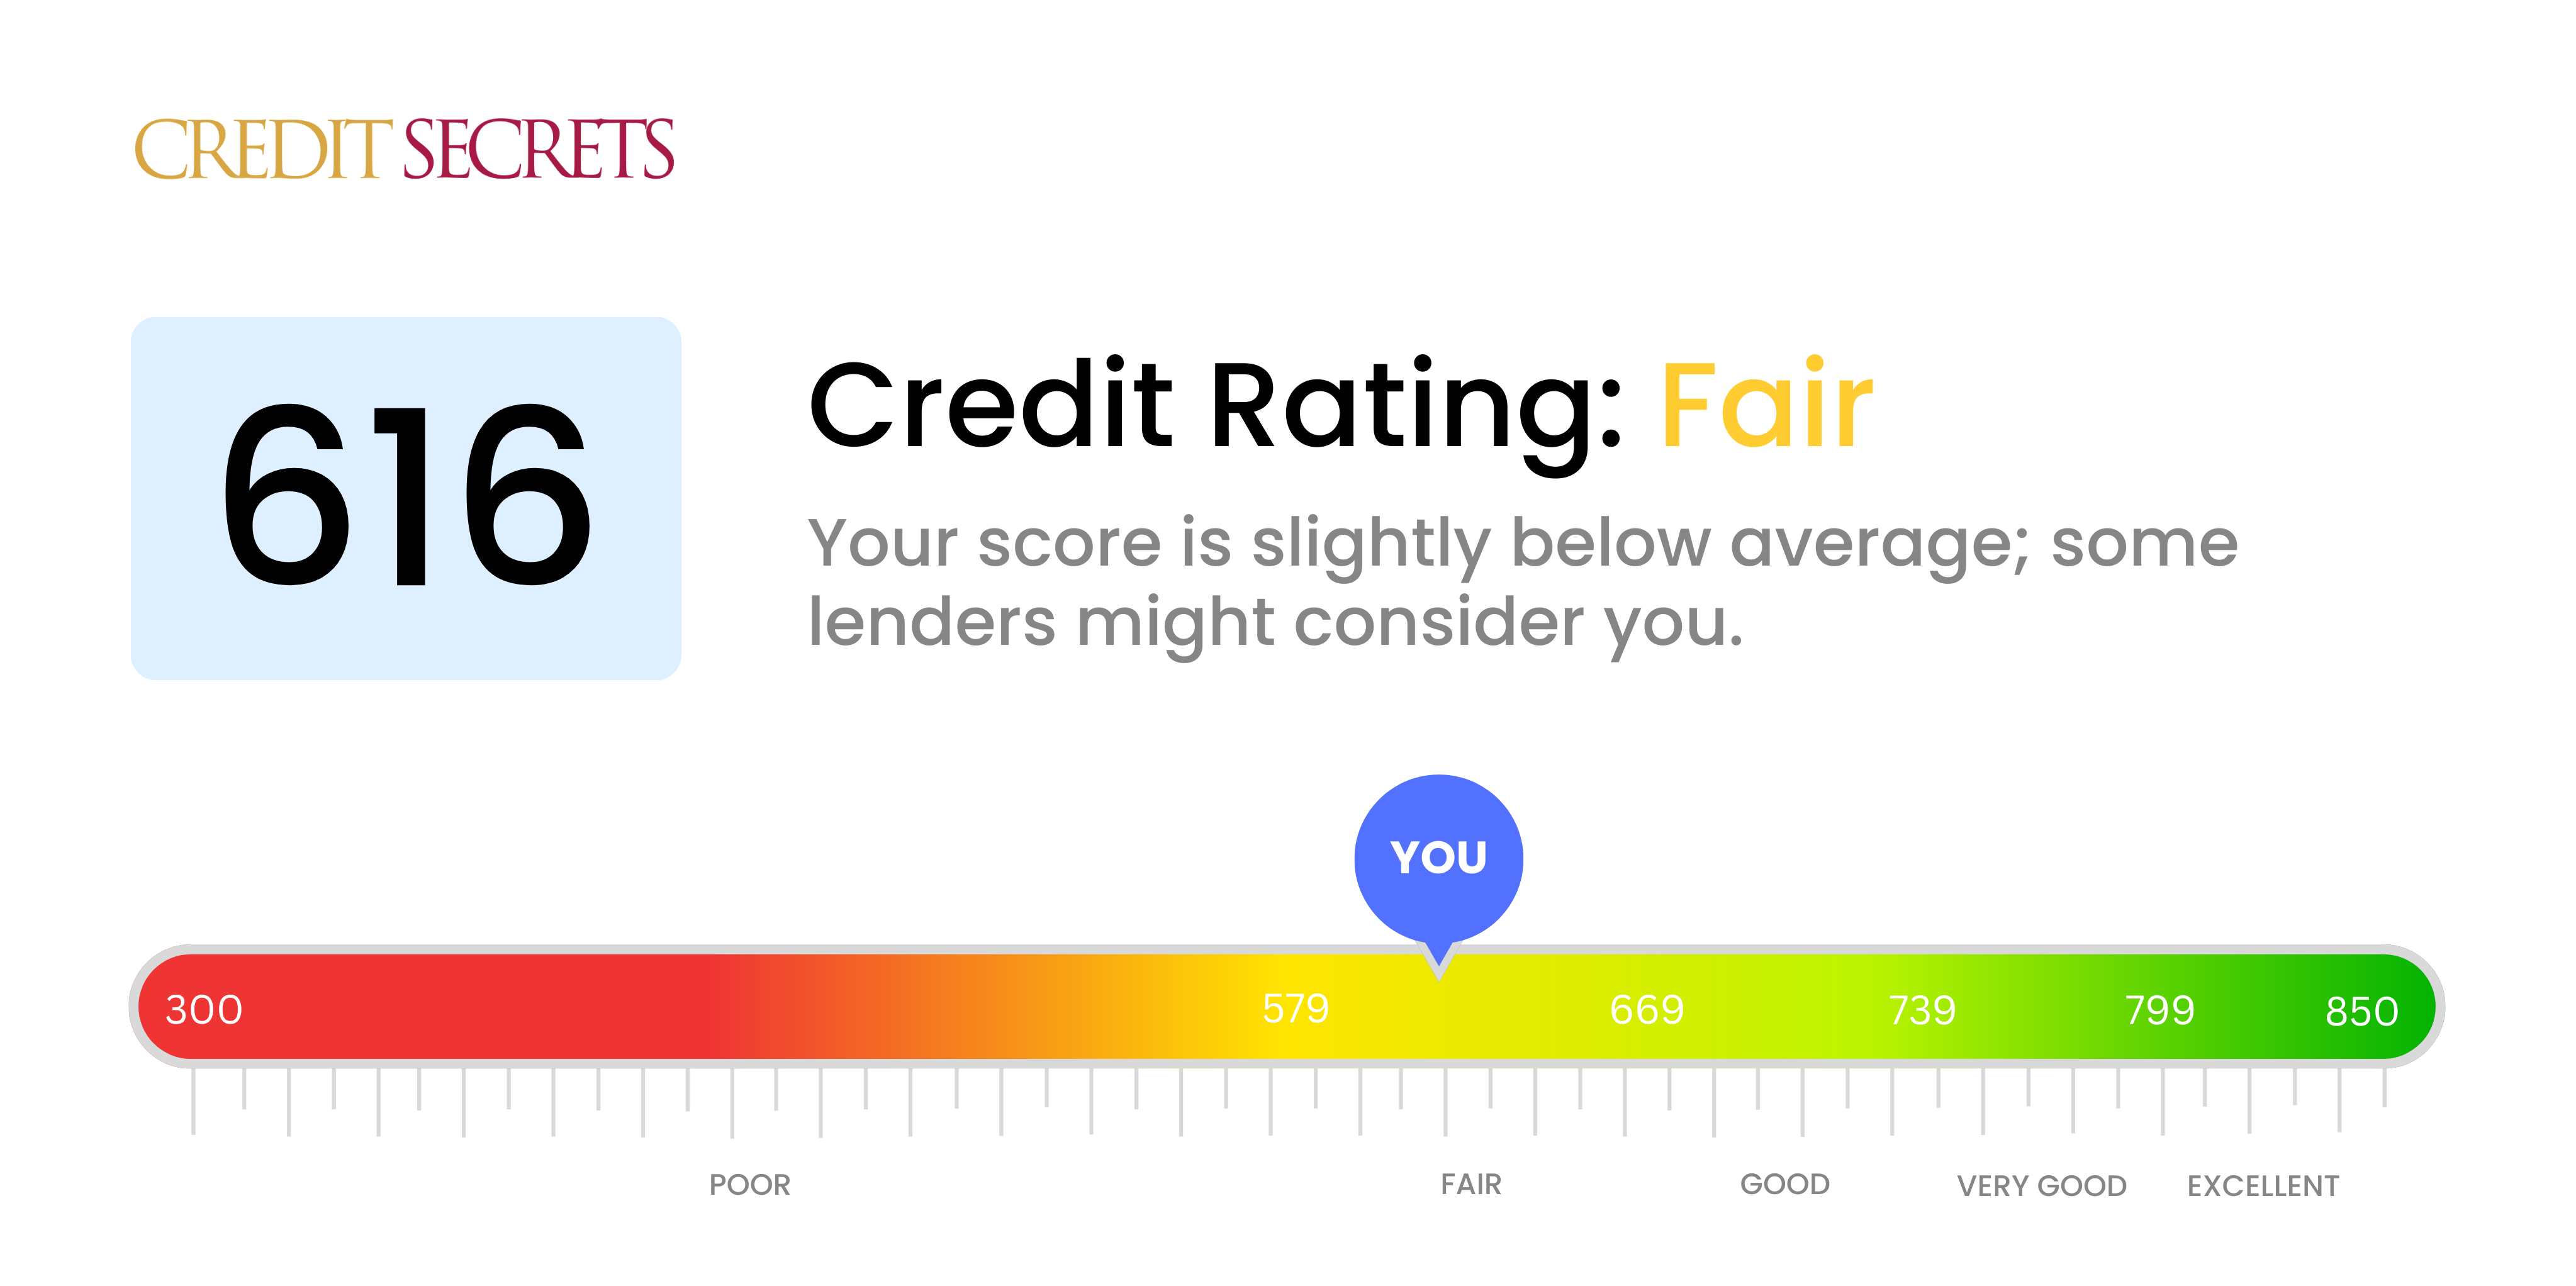 Is 616 a good credit score?